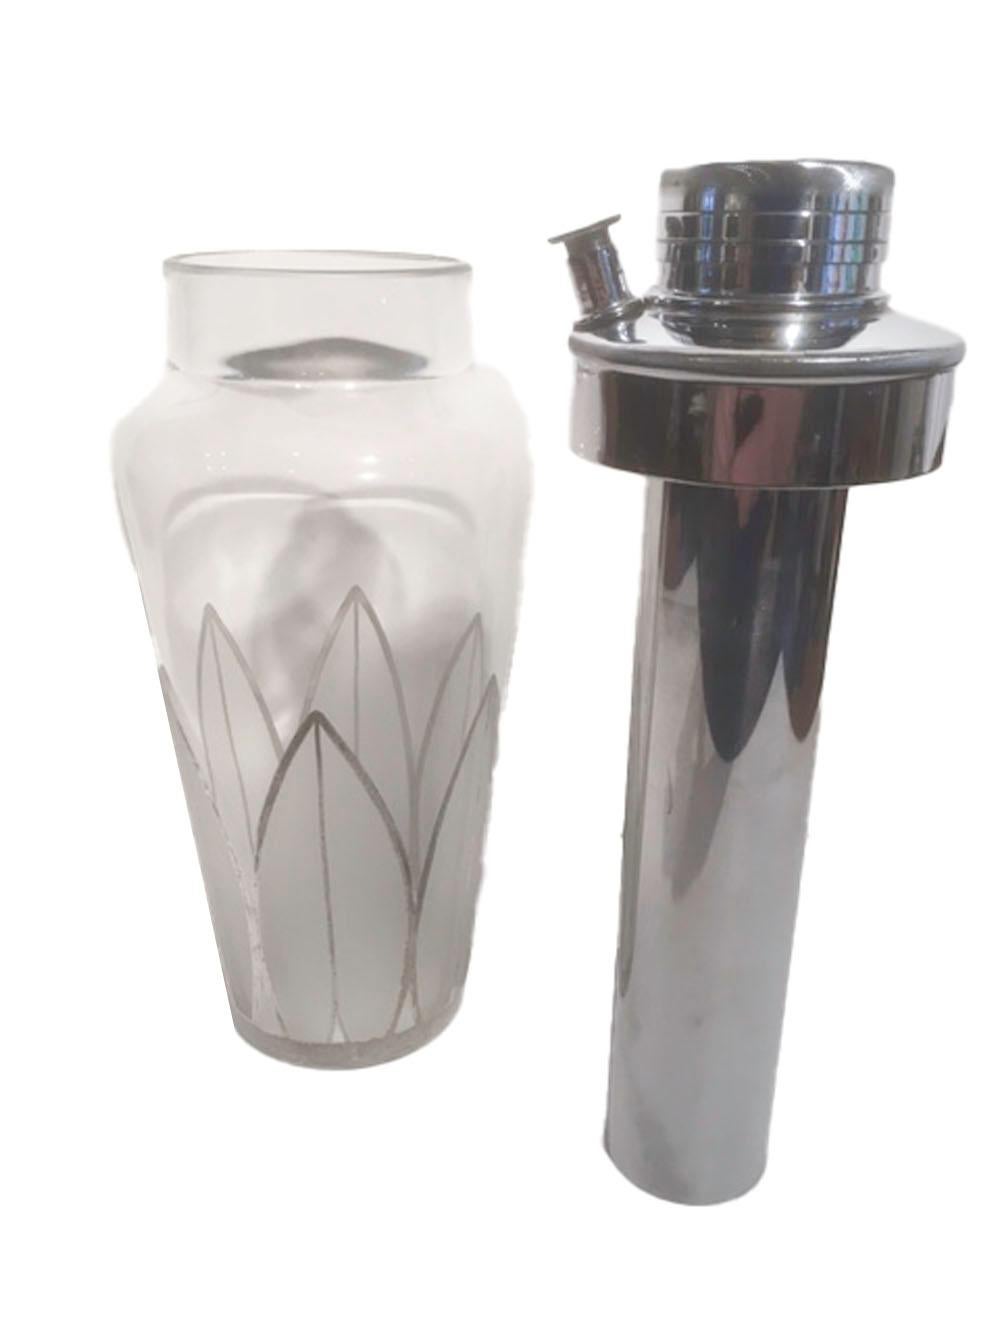 Enameled Art Deco Cocktail Shaker with Silver Overlay and Frosted Palmette Design